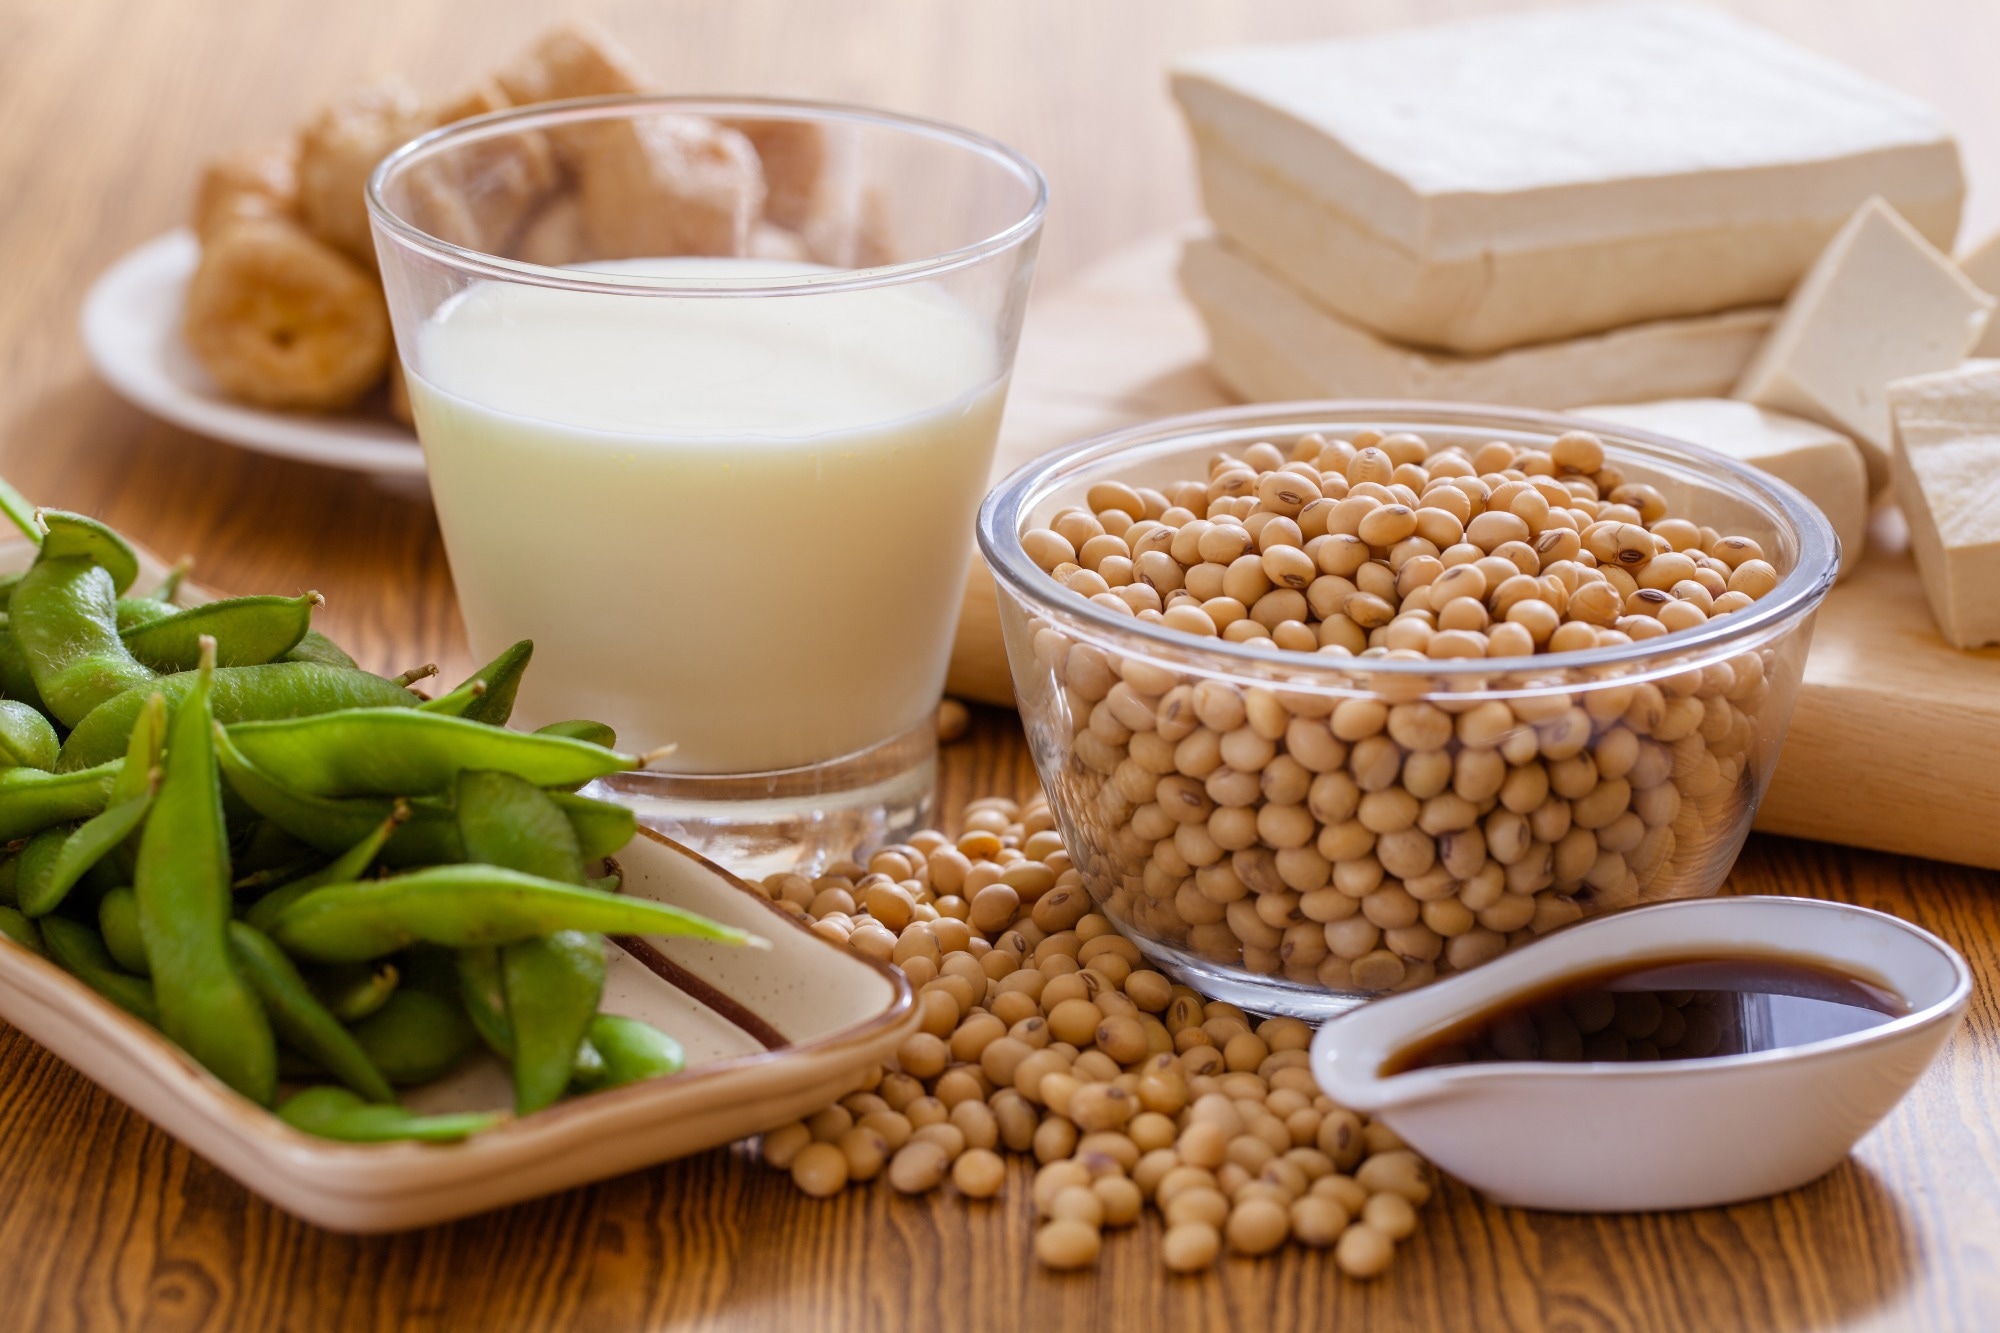 Study: The Use of Soy Isoflavones in the Treatment of Prostate Cancer: A Focus on the Cellular Effects. Image Credit: aito29/Shutterstock.com